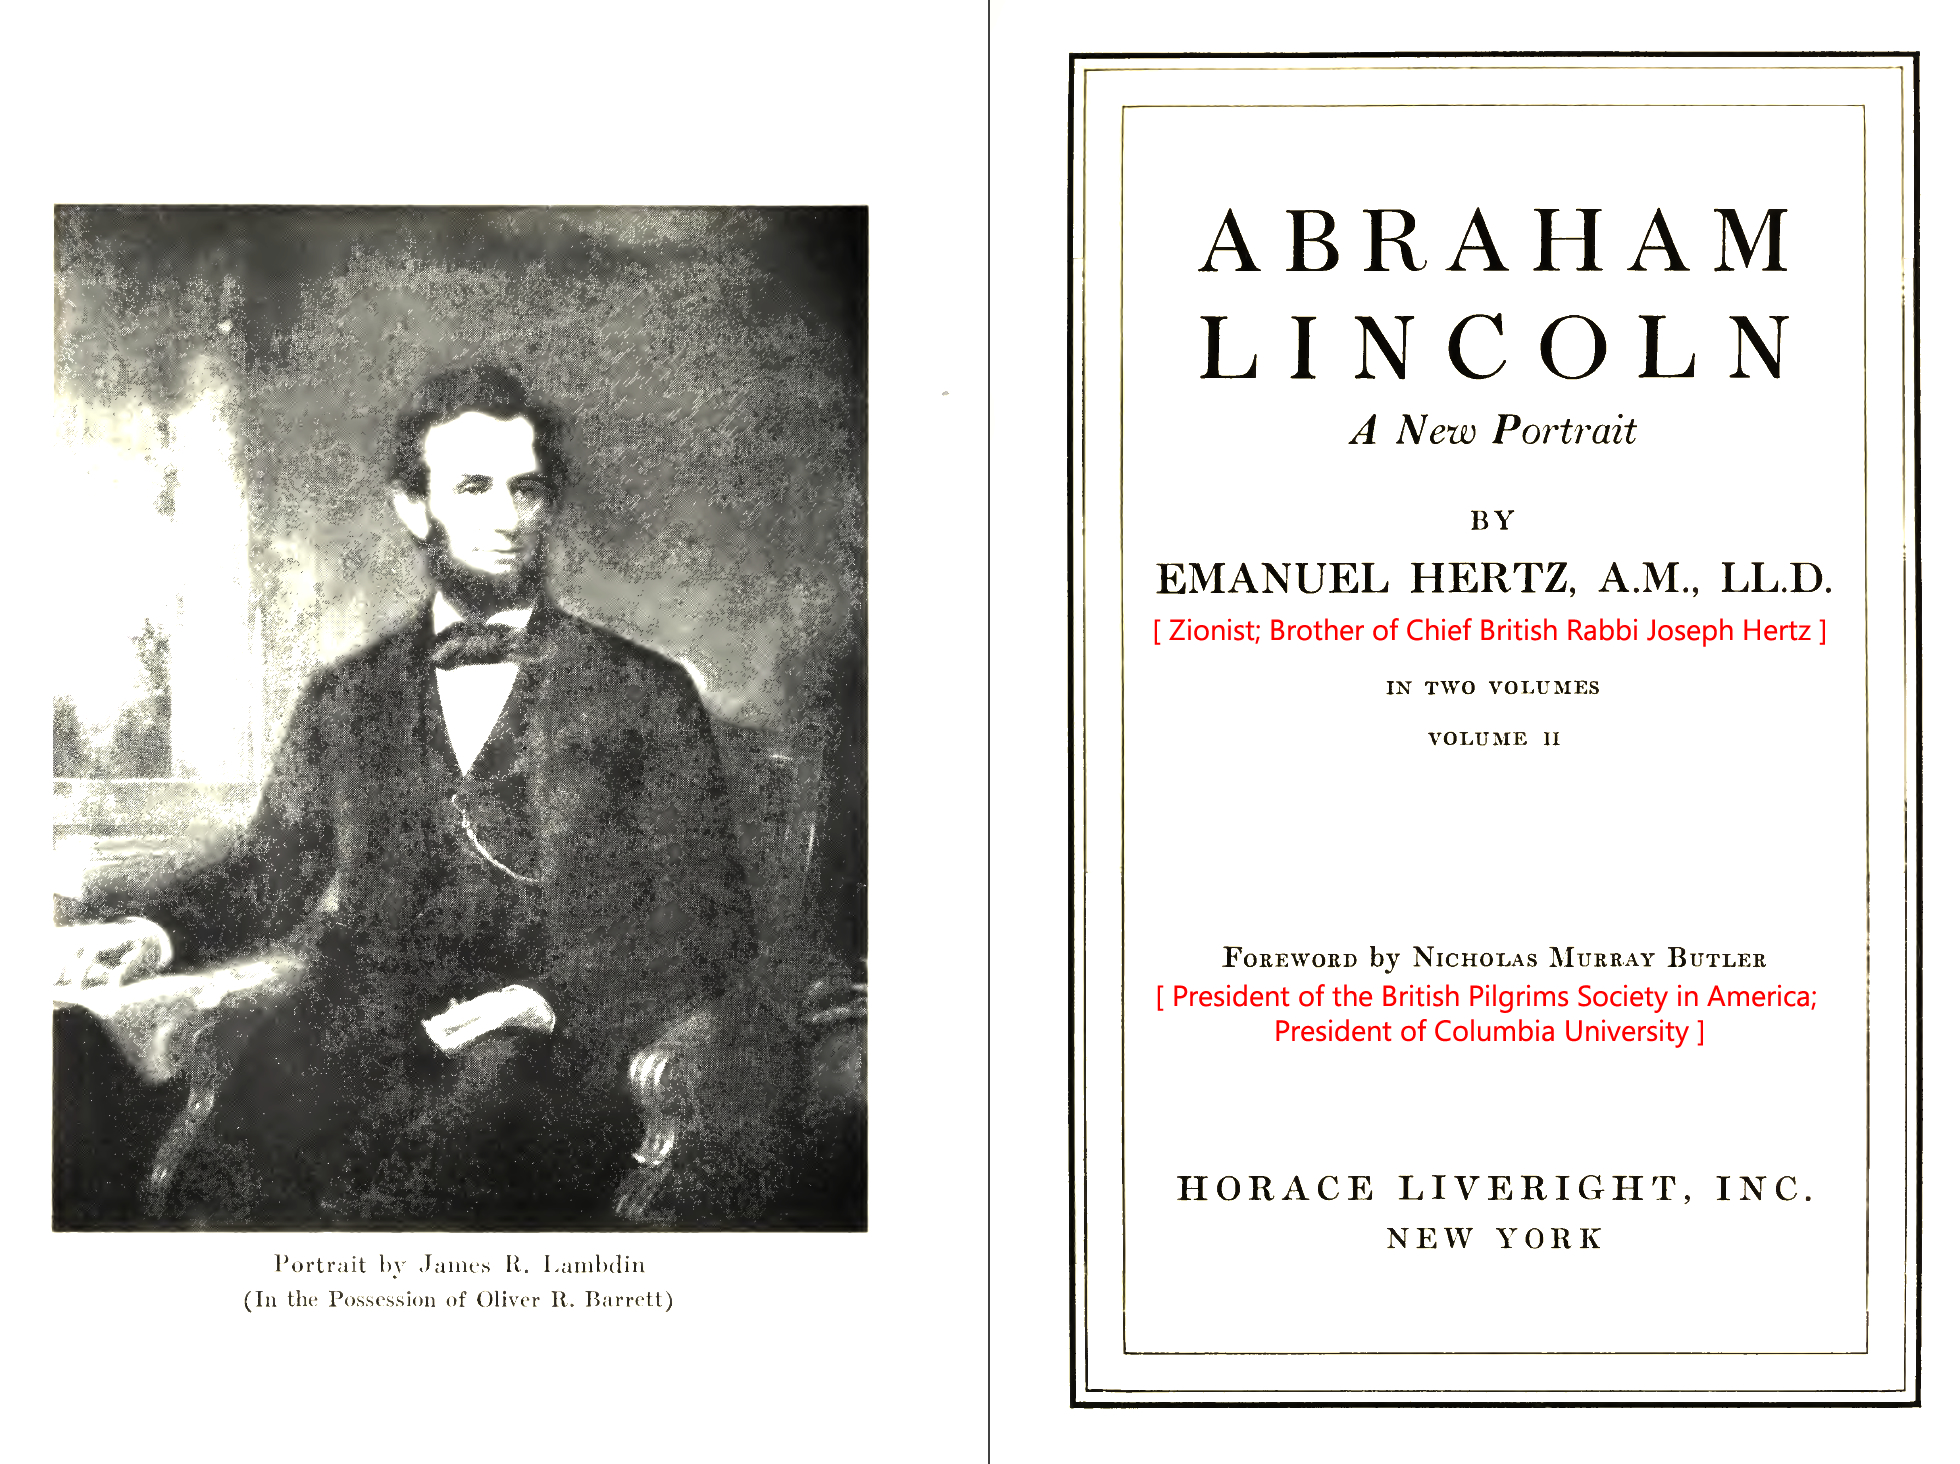 Abraham Lincoln portrait in A New Lincoln History by Emmauel Hertz